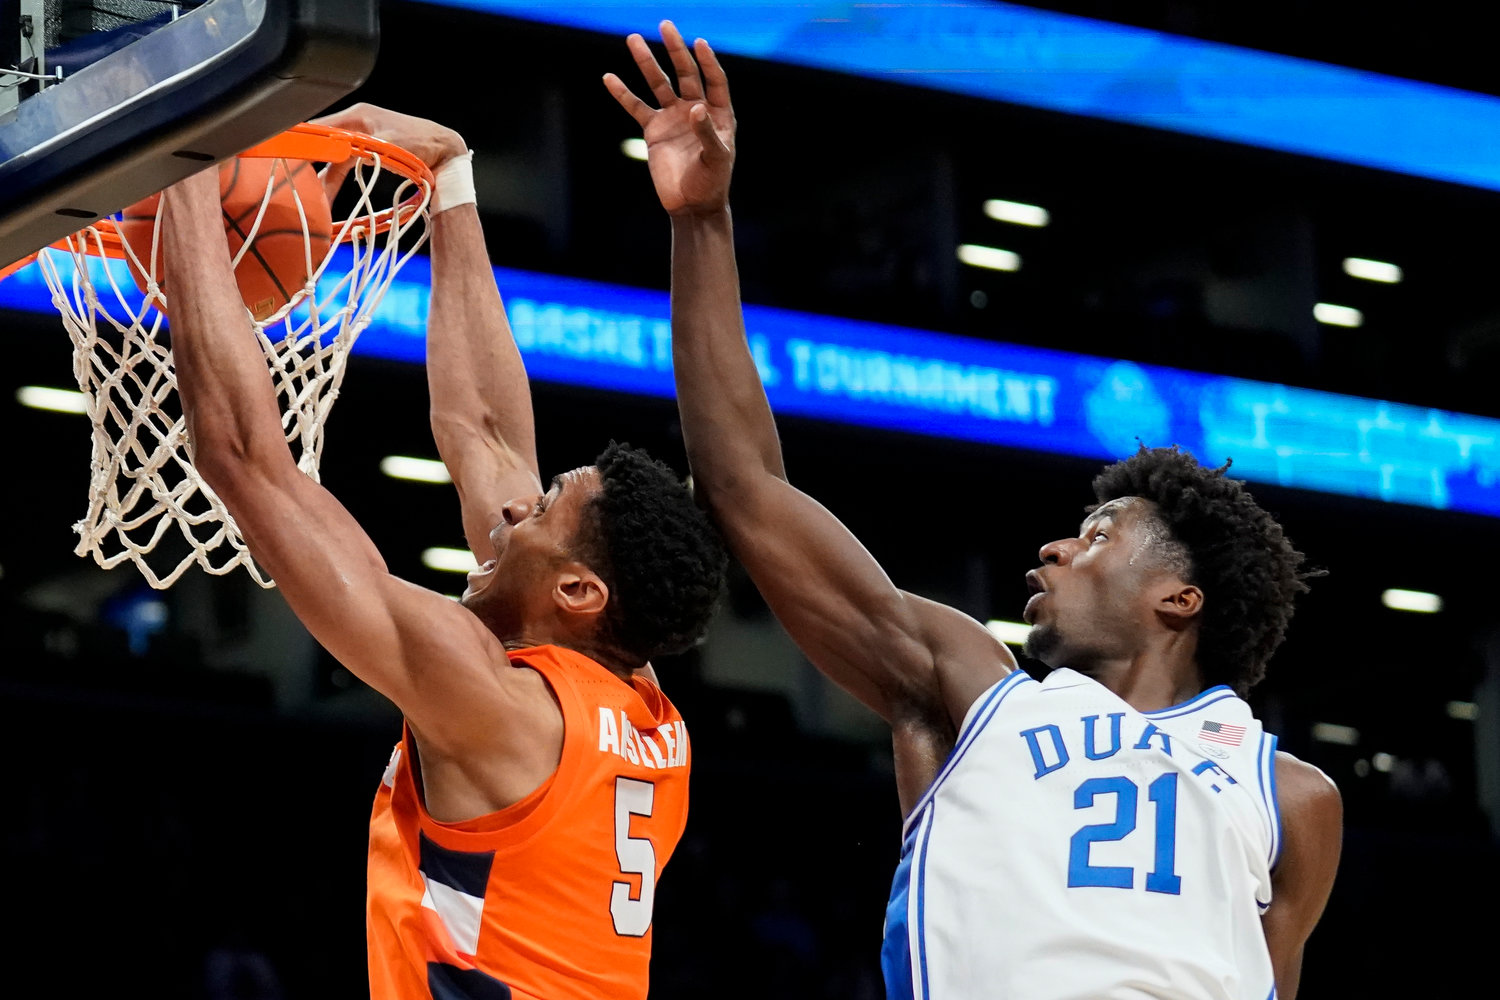 LOOKING TO TRANSFER — Syracuse's Frank Anselem (5) dunks against Duke's AJ Griffin (21) in the first half of a quarterfinal game of the Atlantic Coast Conference men's tournament on March 10 in New York. Anselem is entering the transfer portal.